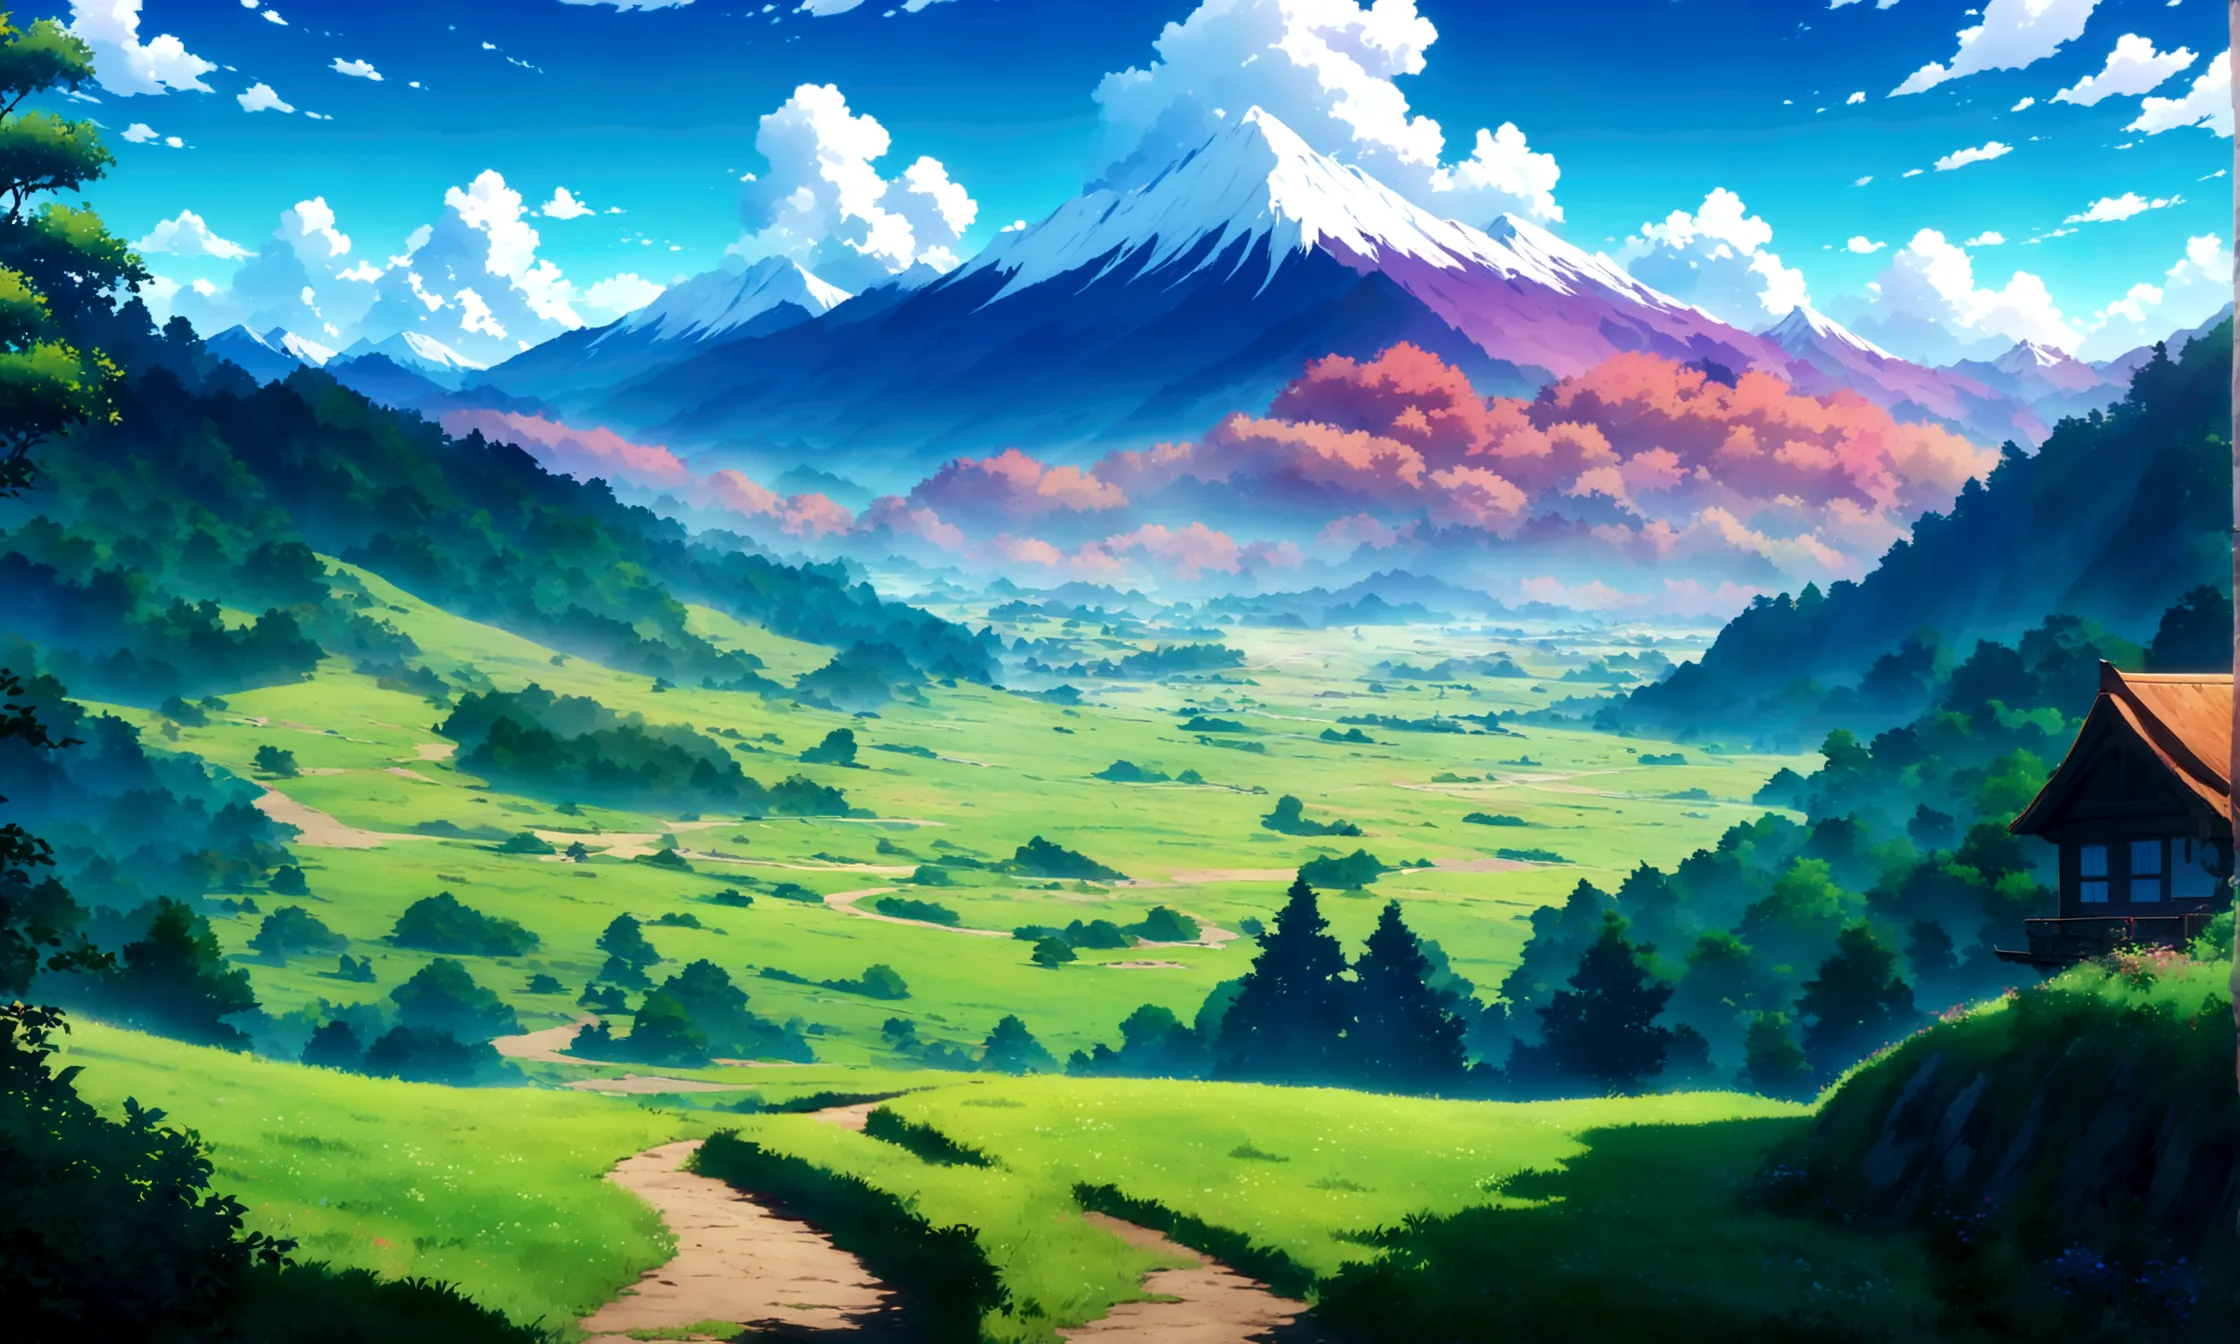 
japanese anime - style painting of a beautiful day grassy field with mountains , blue cloudy sky,anime countryside landscape, a...